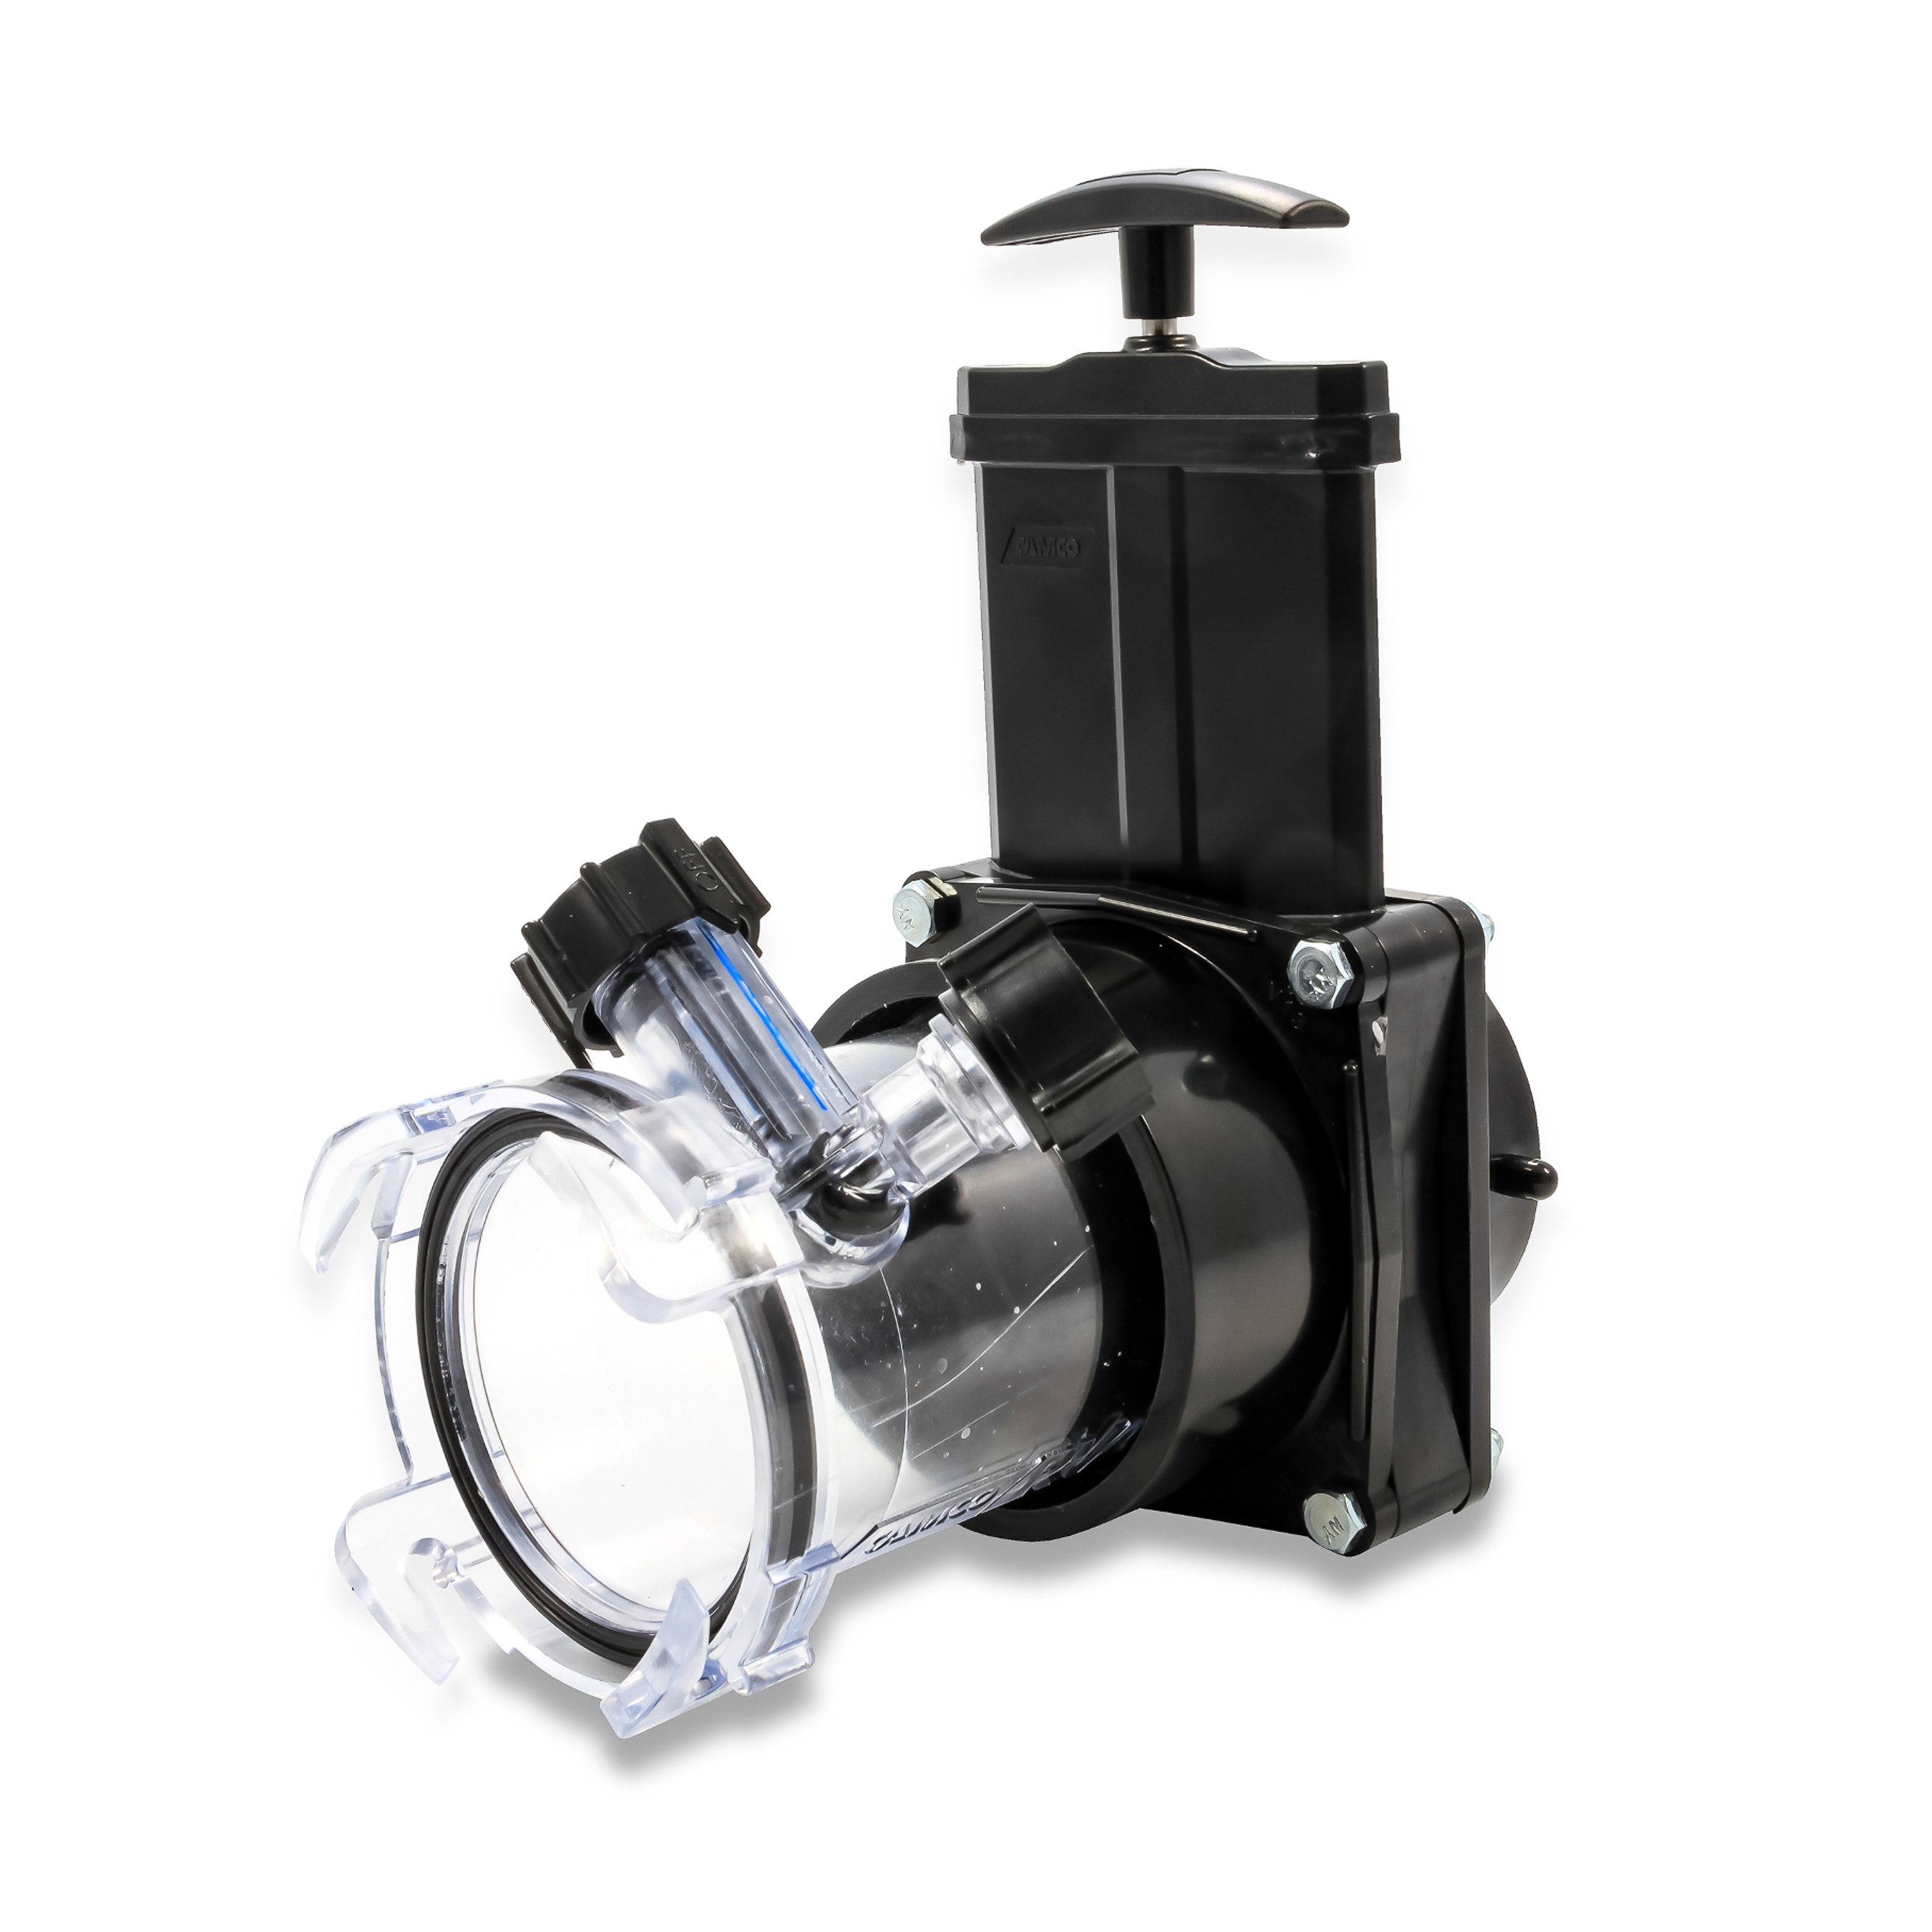 Camco Dual Flush Pro Camper/RV Holding Tank Rinser | 3" Gate Valve & Reverse Flush Valve | Empties and Flushes RV Black Water Tanks and RV Sewer Hose (39062) - image 3 of 10